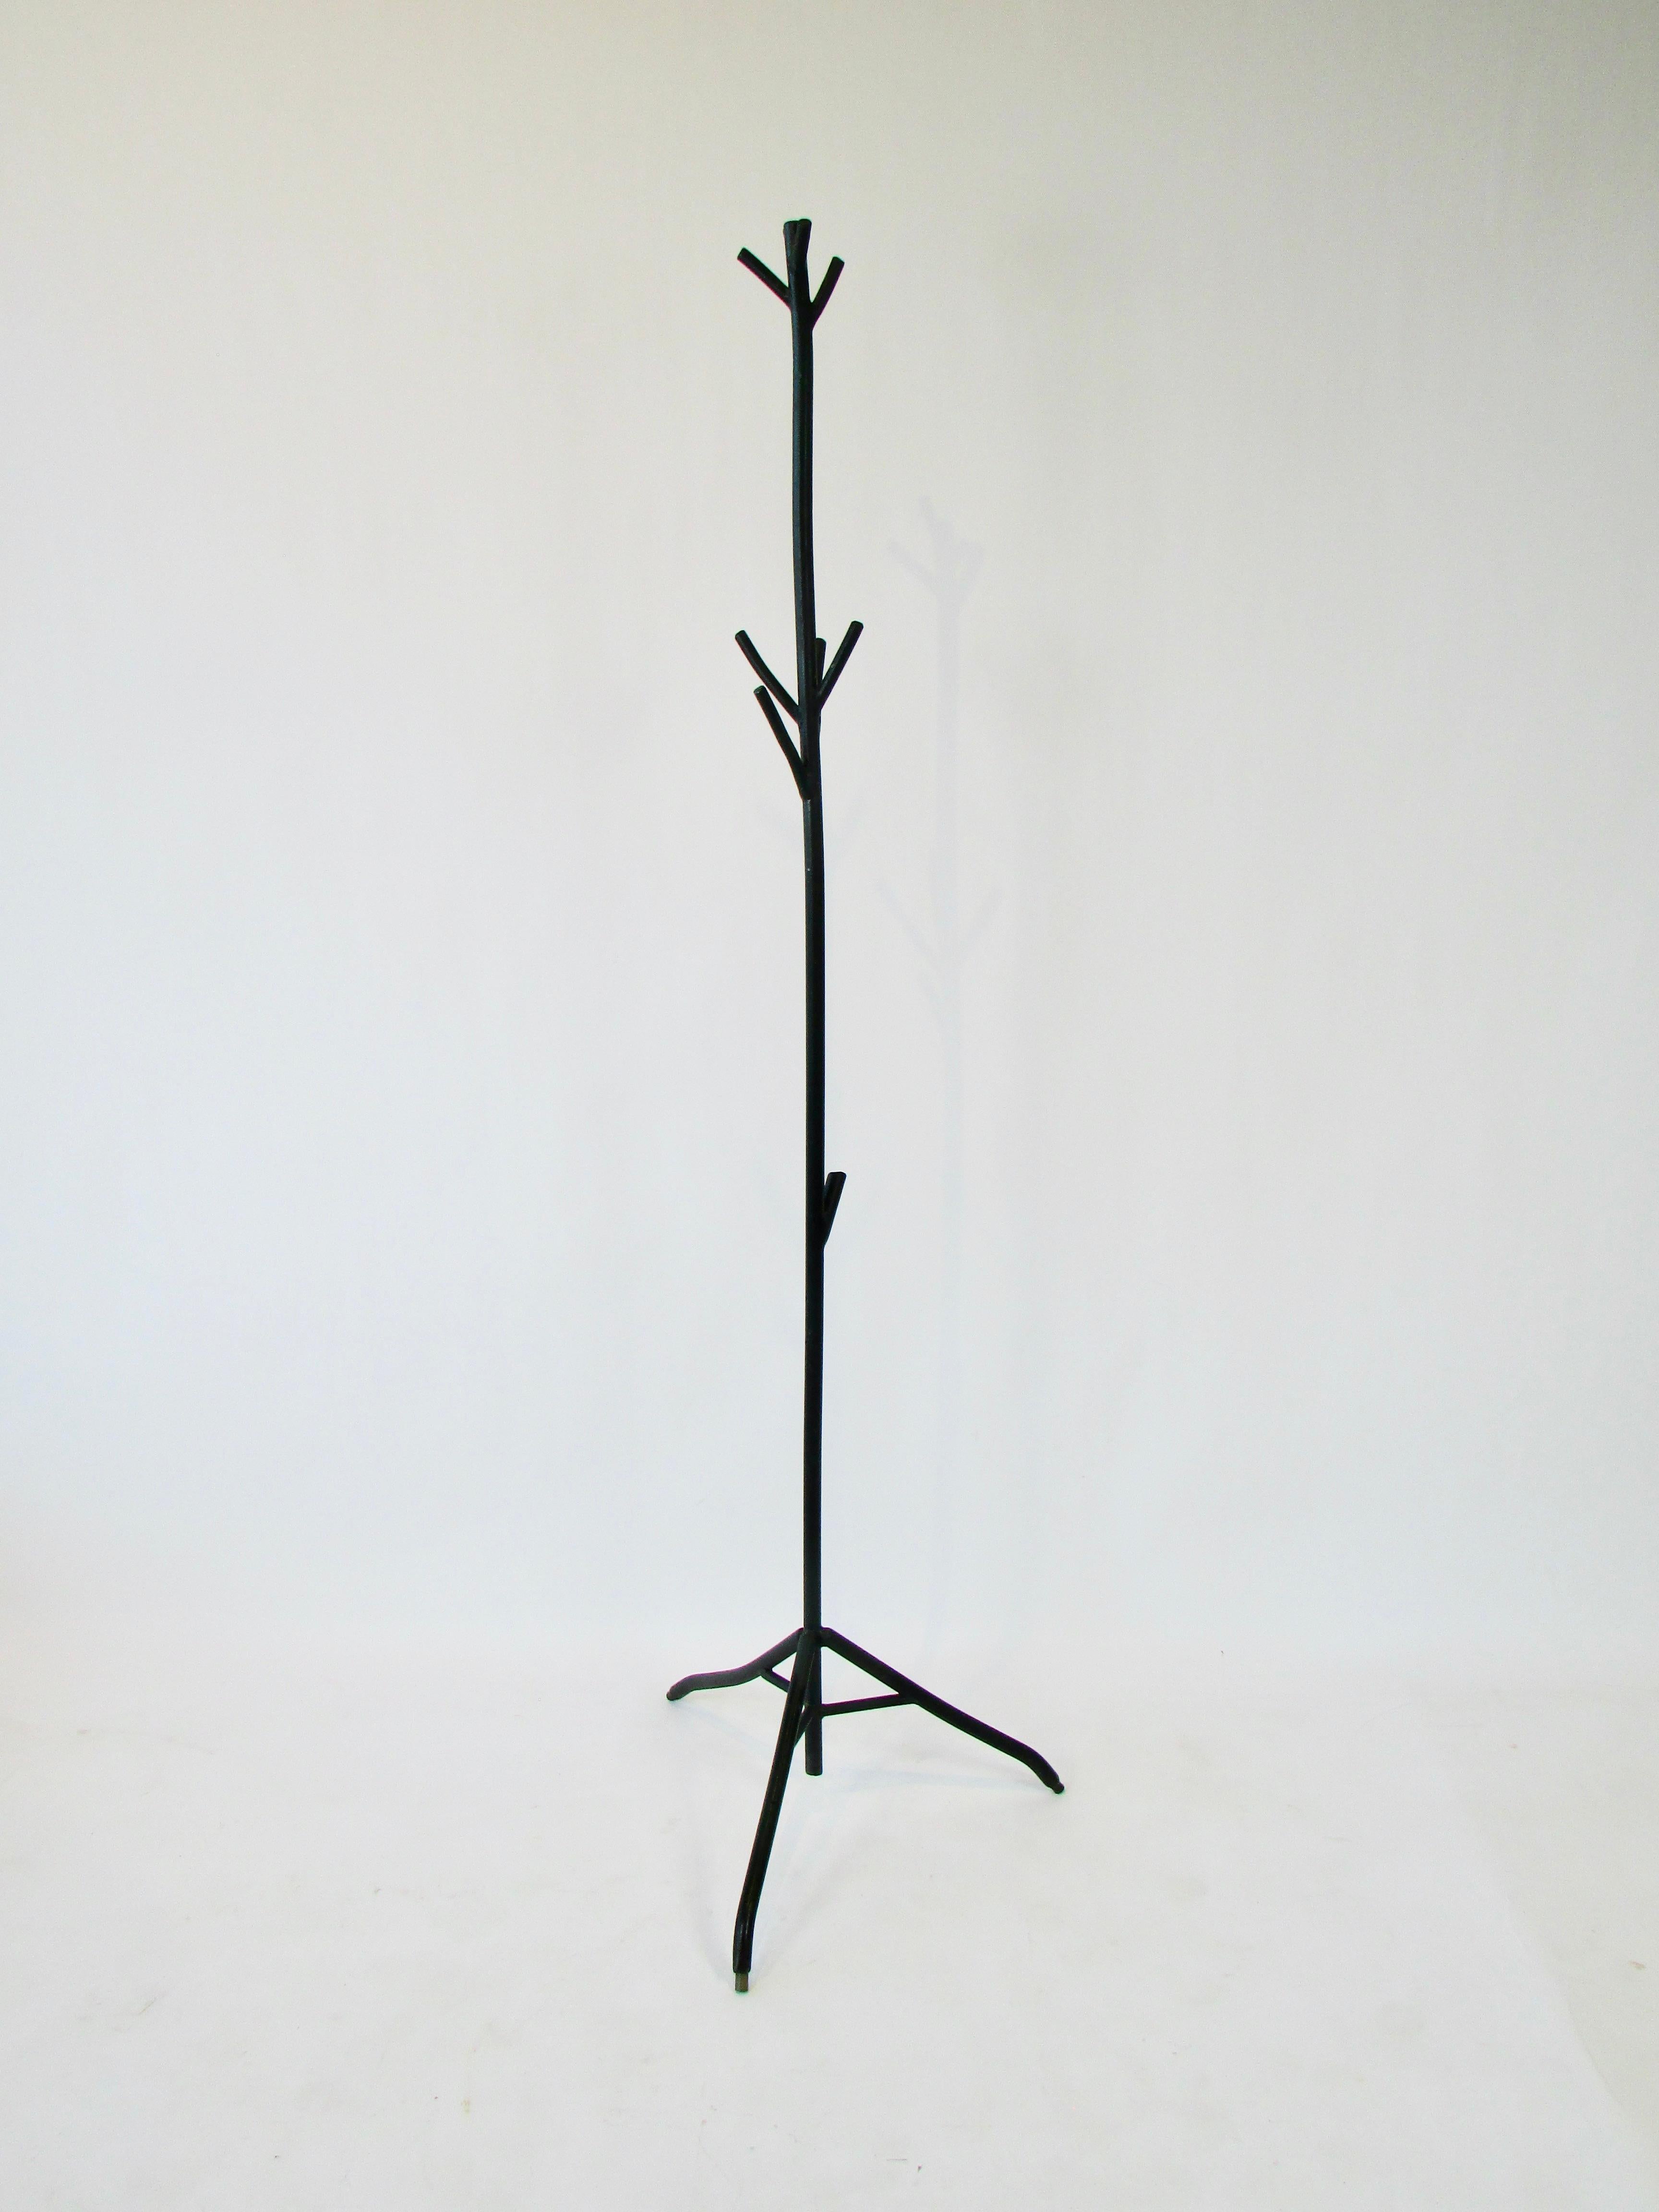 Wrought iron hat rack coat stand. Sculpted and welded into an organic tree form.